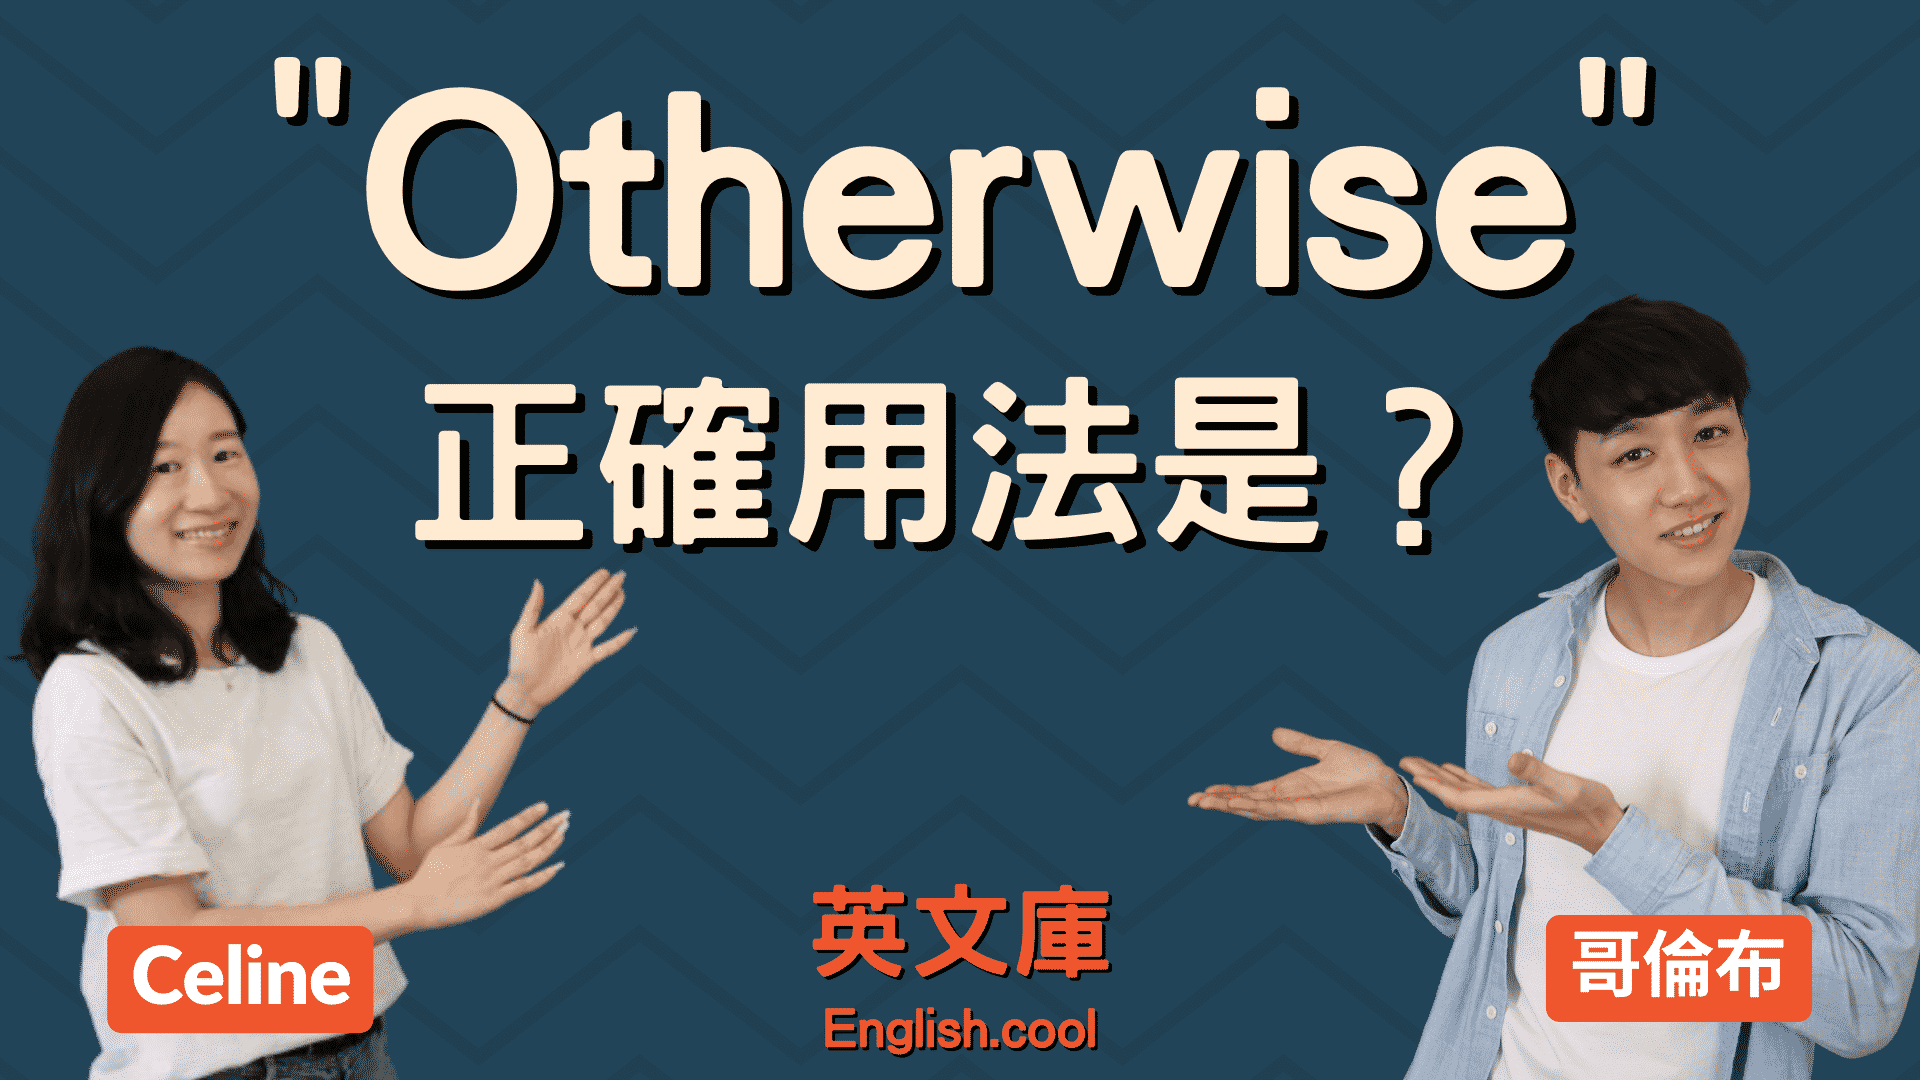 You are currently viewing 「Otherwise」正確用法是？來看例句搞懂！